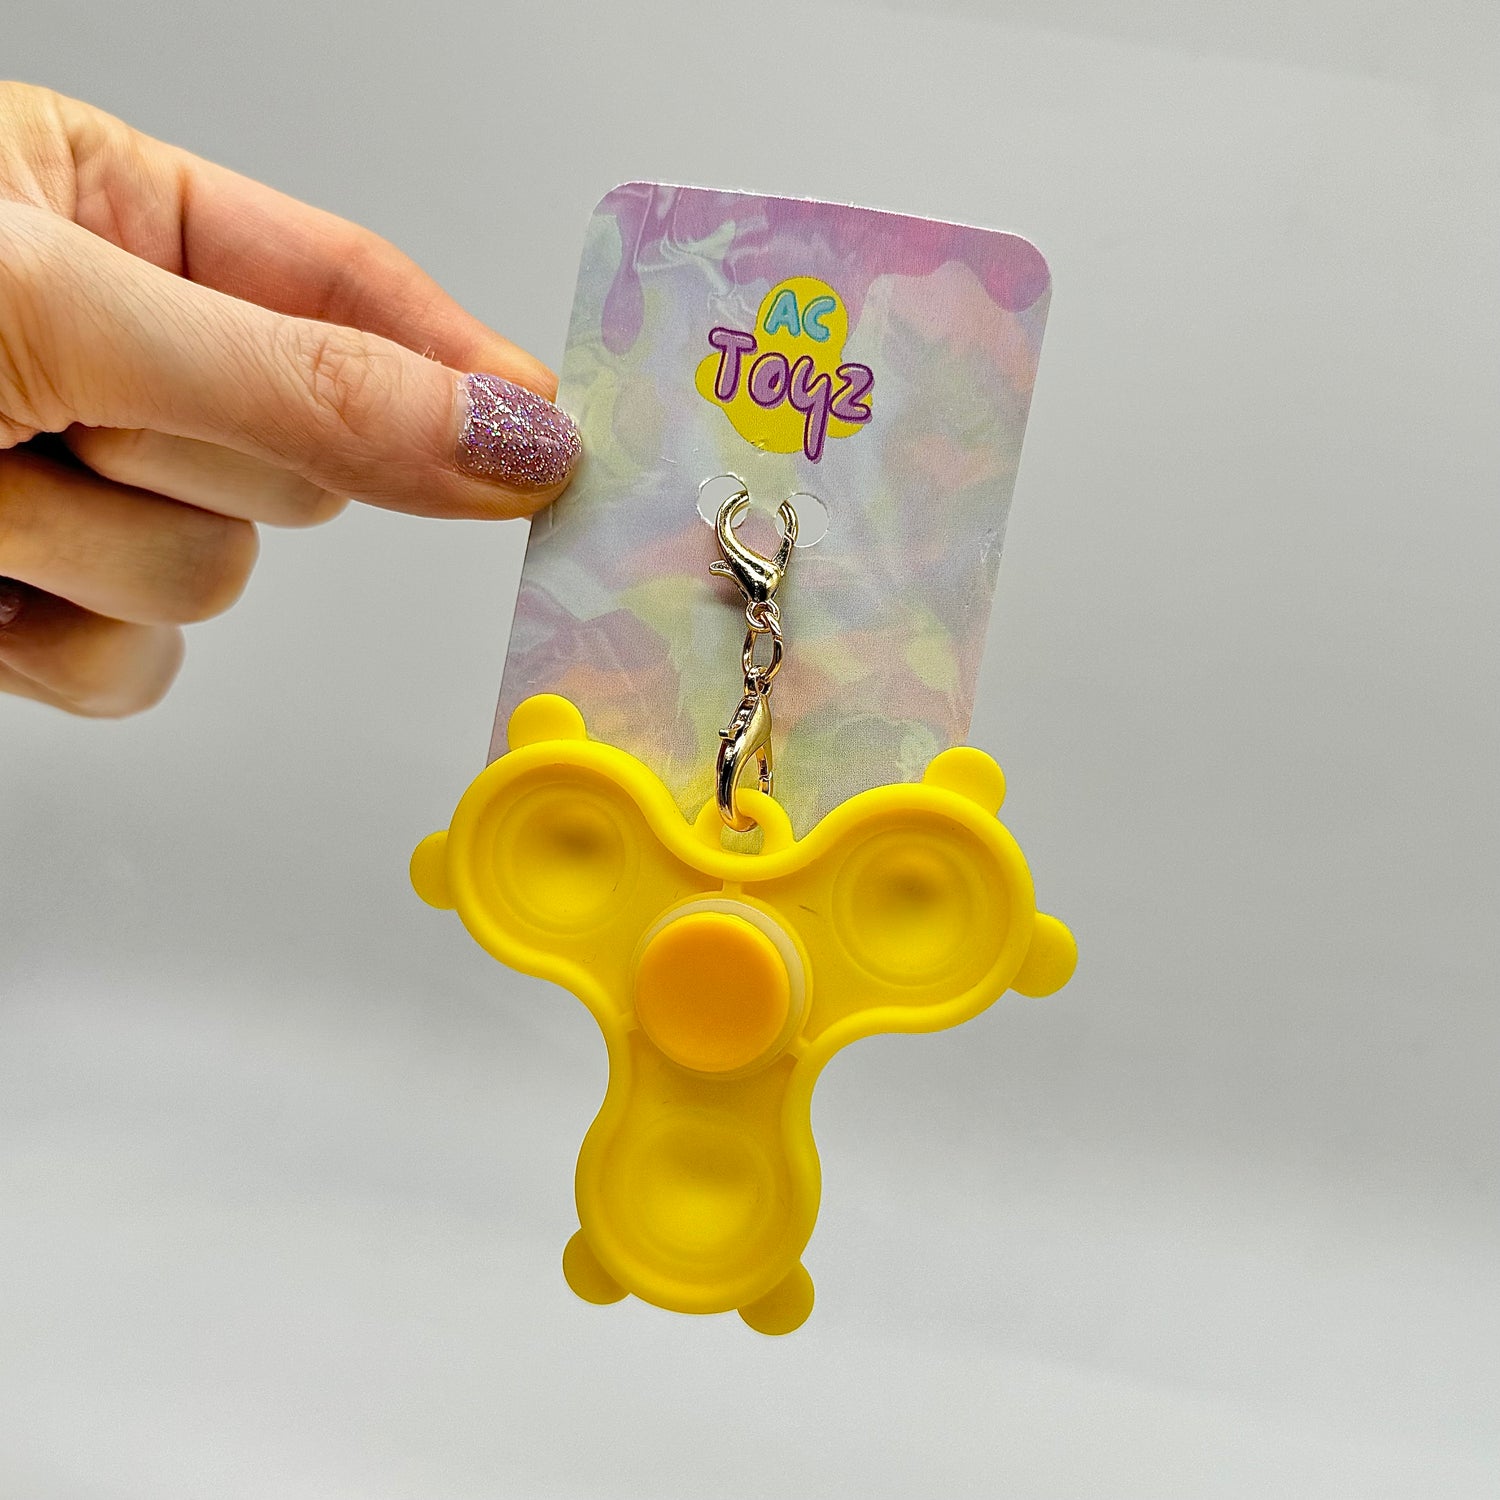 Comfort Keychains® - fidget tools that make a difference!